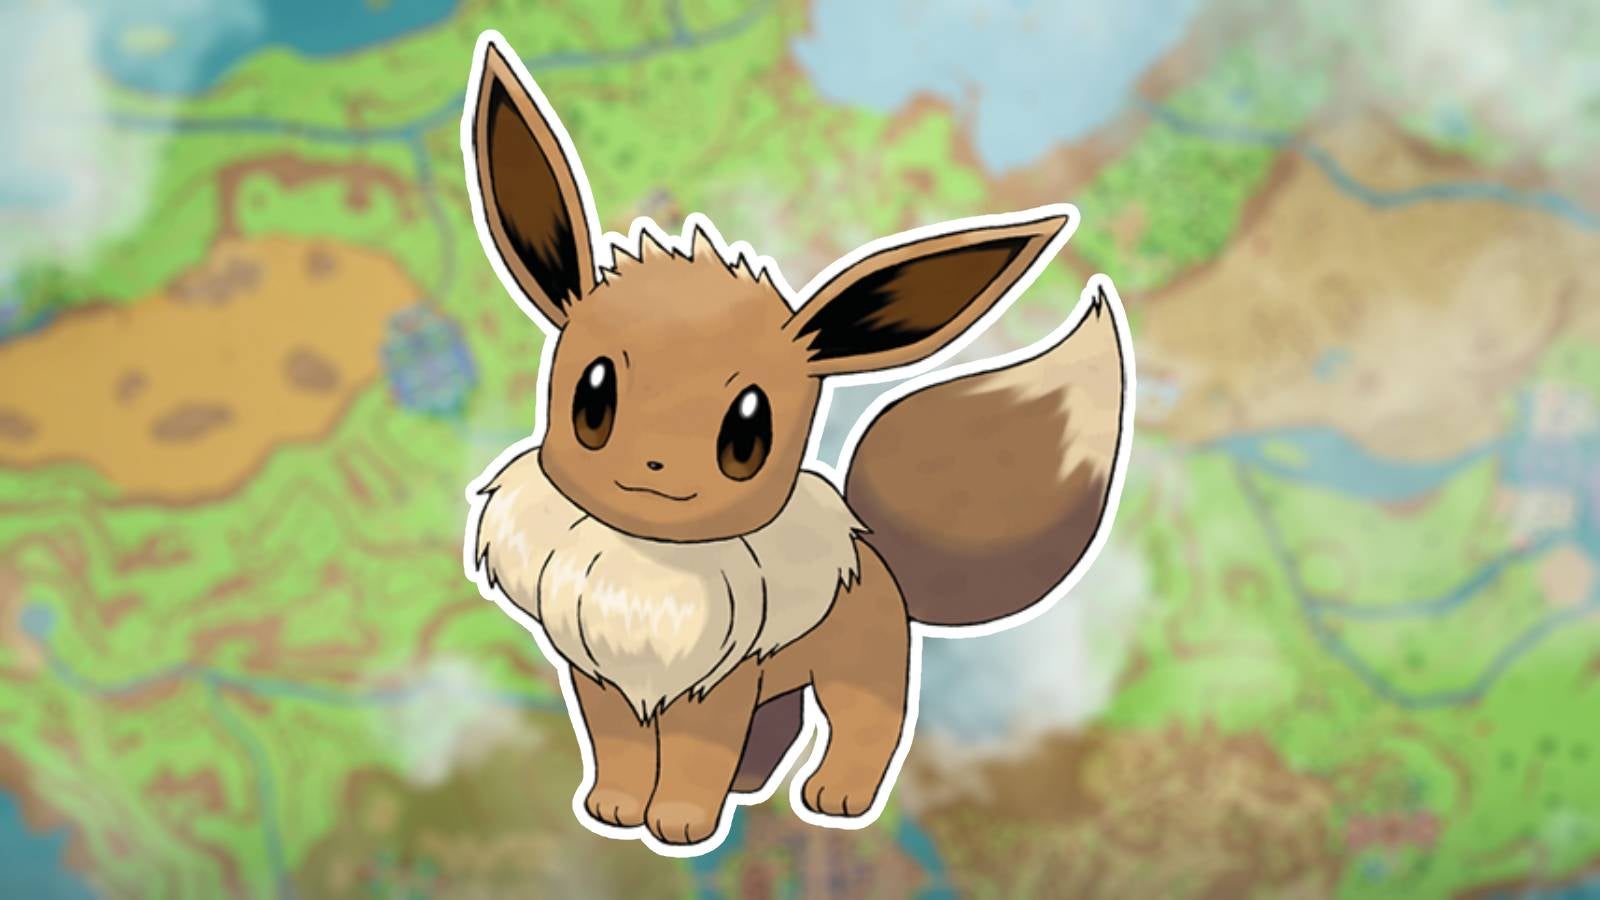 Image for Pokémon Scarlet and Violet Eevee evolutions: How to evolve Eevee into Flareon, Vaporeon, Jolteon, Umbreon, Espeon, Leafeon, Glaceon, and Sylveon